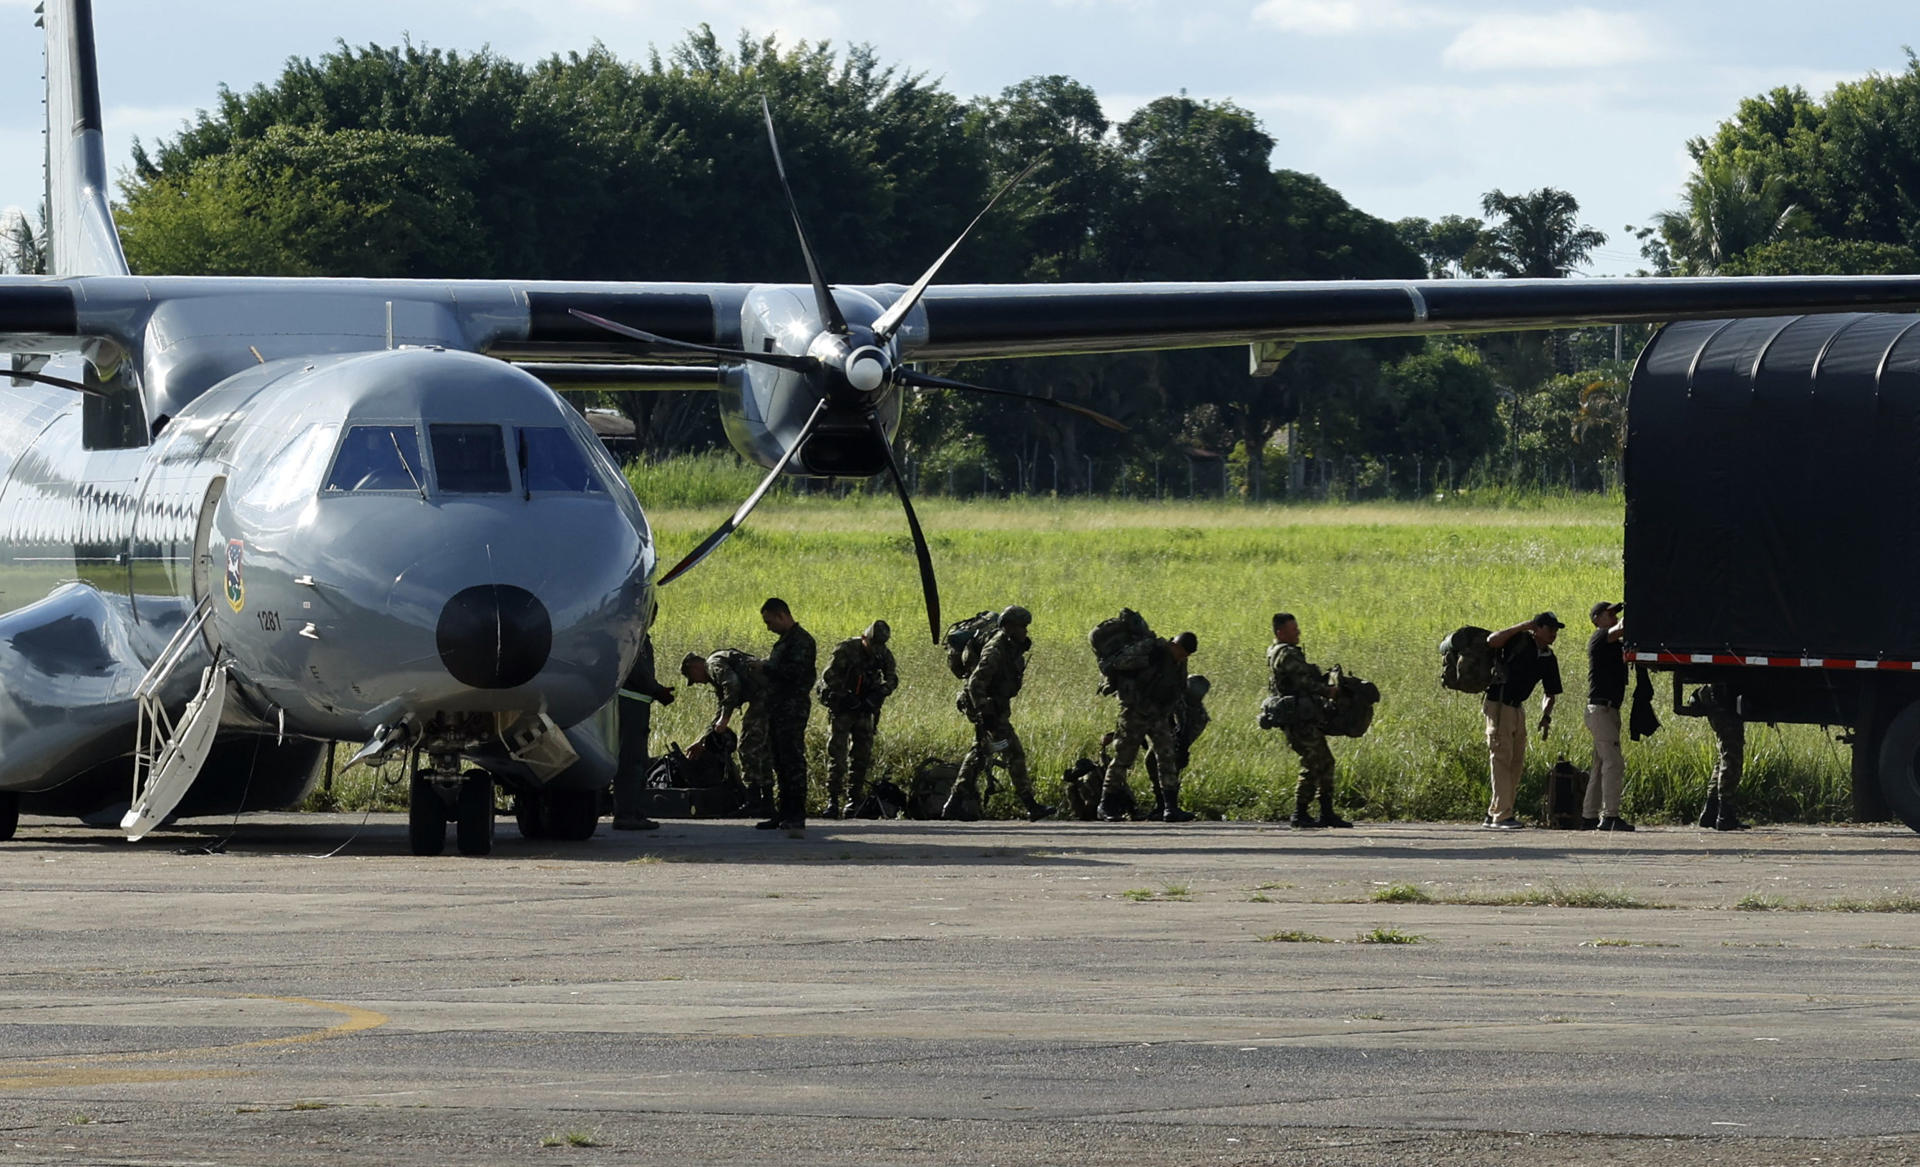 Soldiers lend themselves to join the search for minors lost after a plane crash in southern Colombia, in San José del Guaviare (Guaviare), on May 20, 2023. BLAZETRENDS/Mauricio Dueñas Castañeda